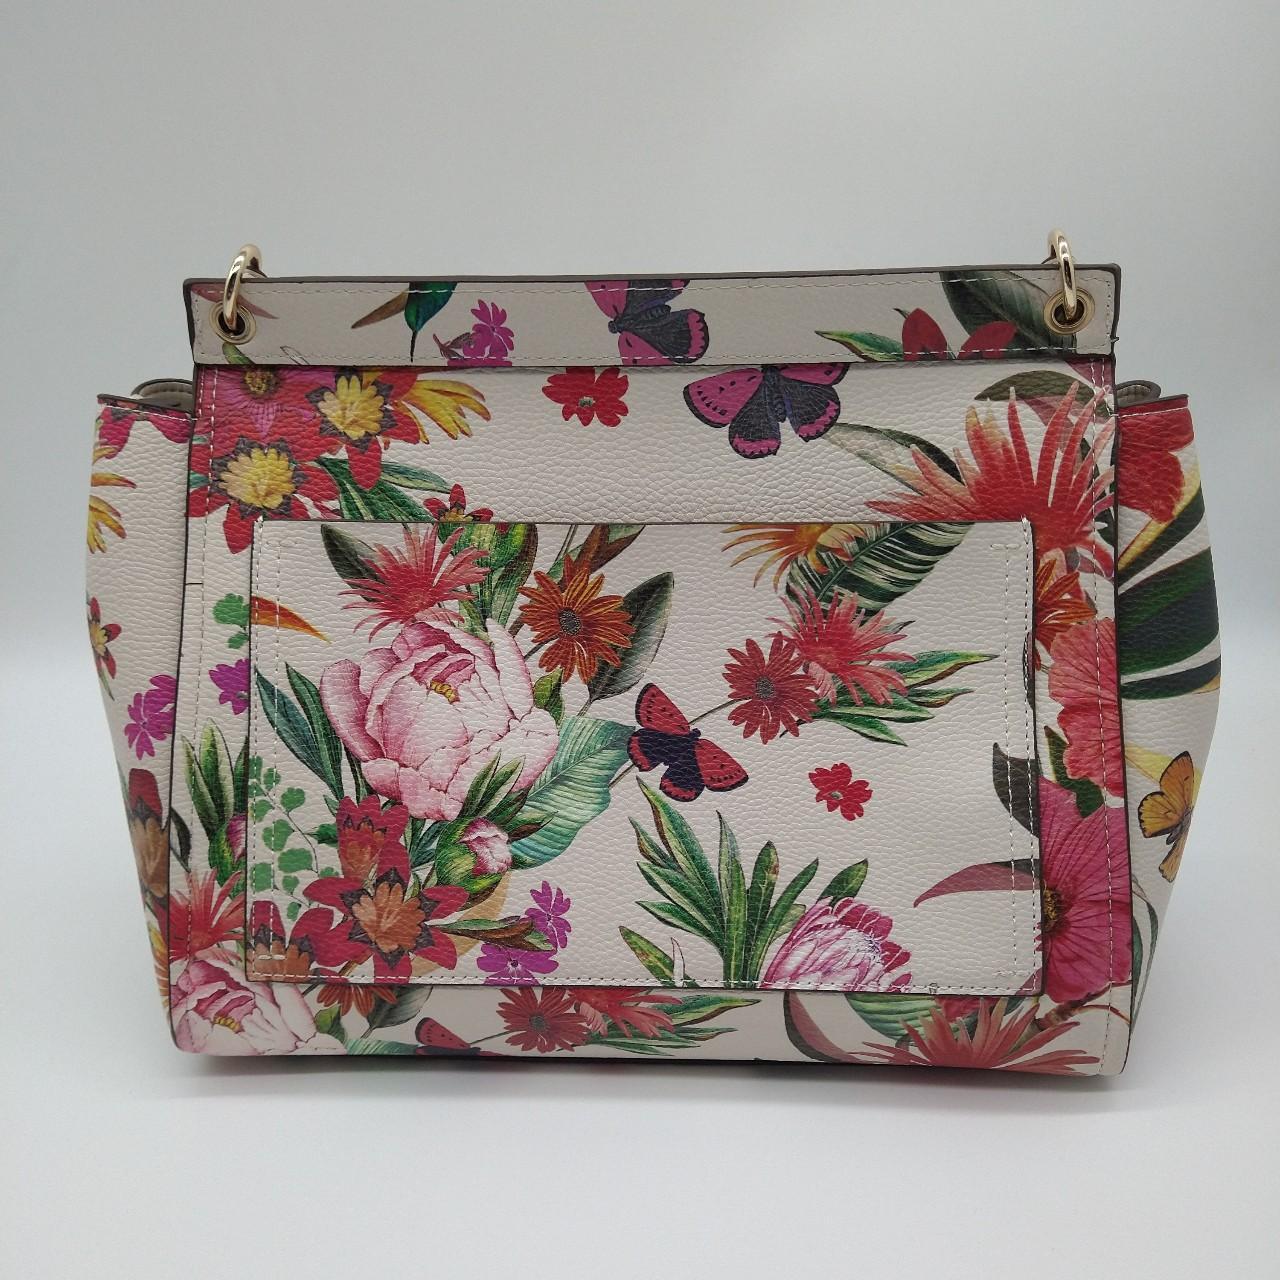 Product Image 3 - Fiorelli Flynn floral satchel in